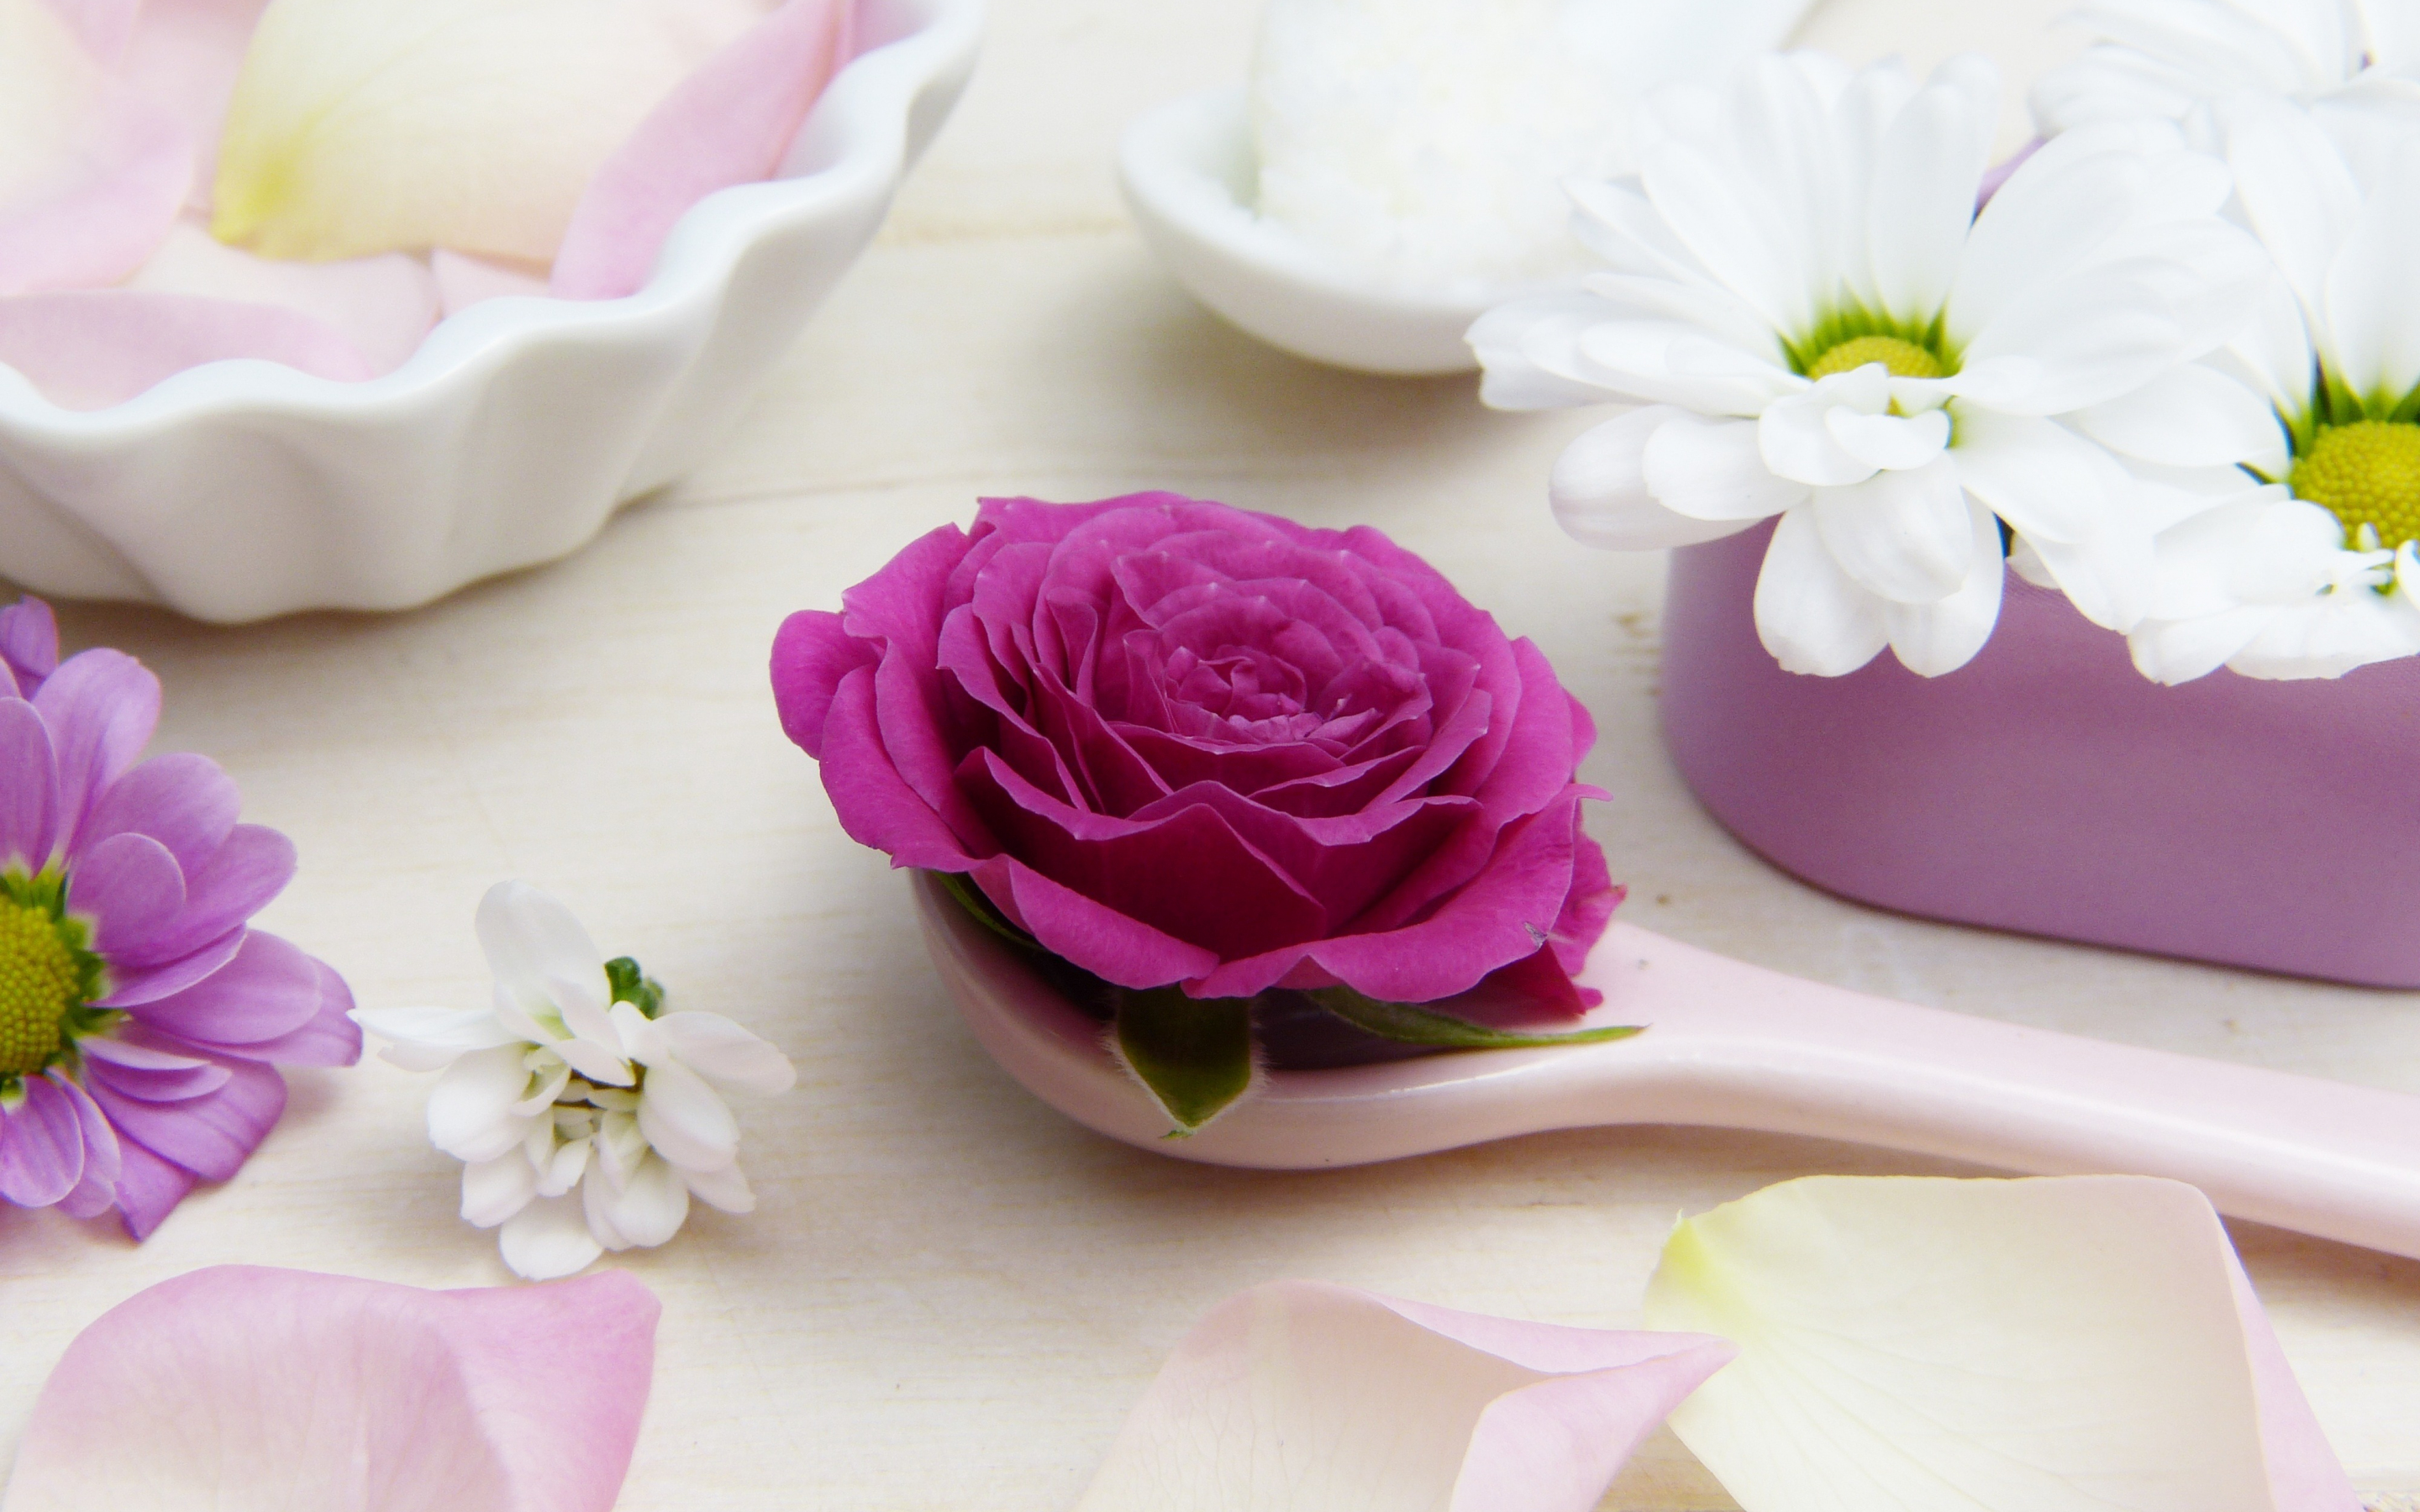 Aroma, spoon, flowers, roses, 2880x1800 wallpaper